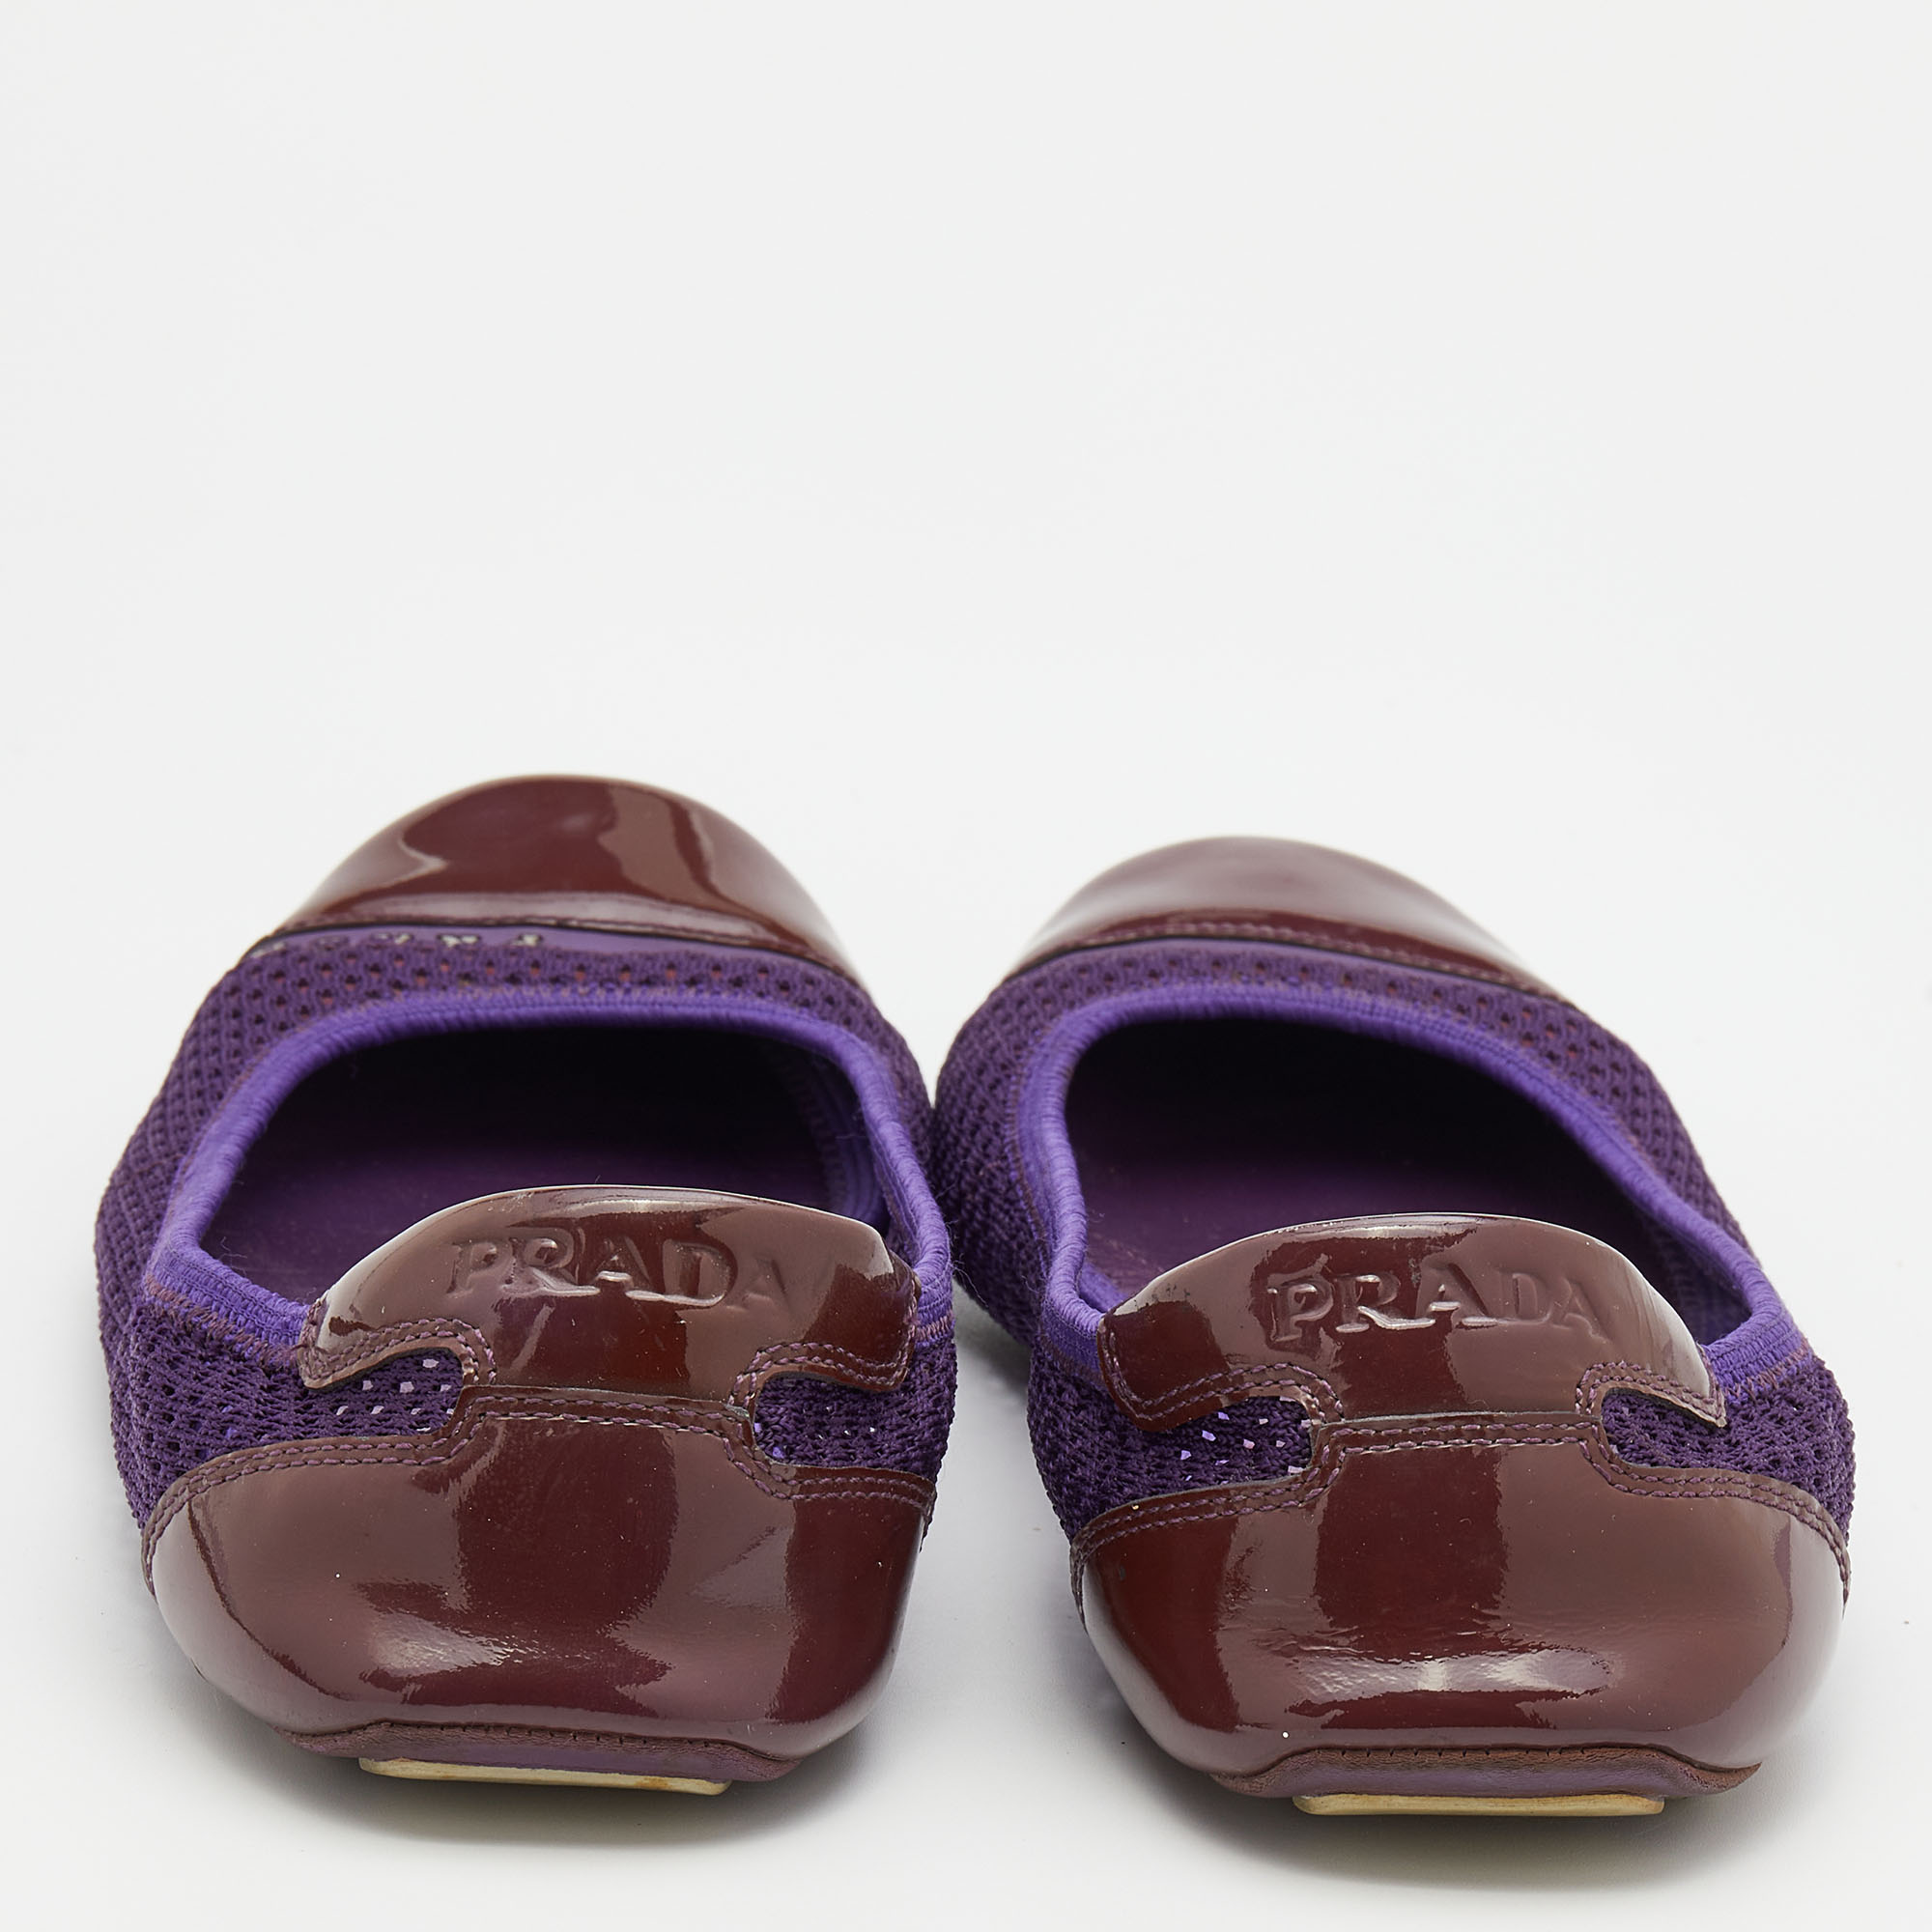 Prada Sport Purple/Brown Mesh And Patent Leather Ballet Flats Size 37